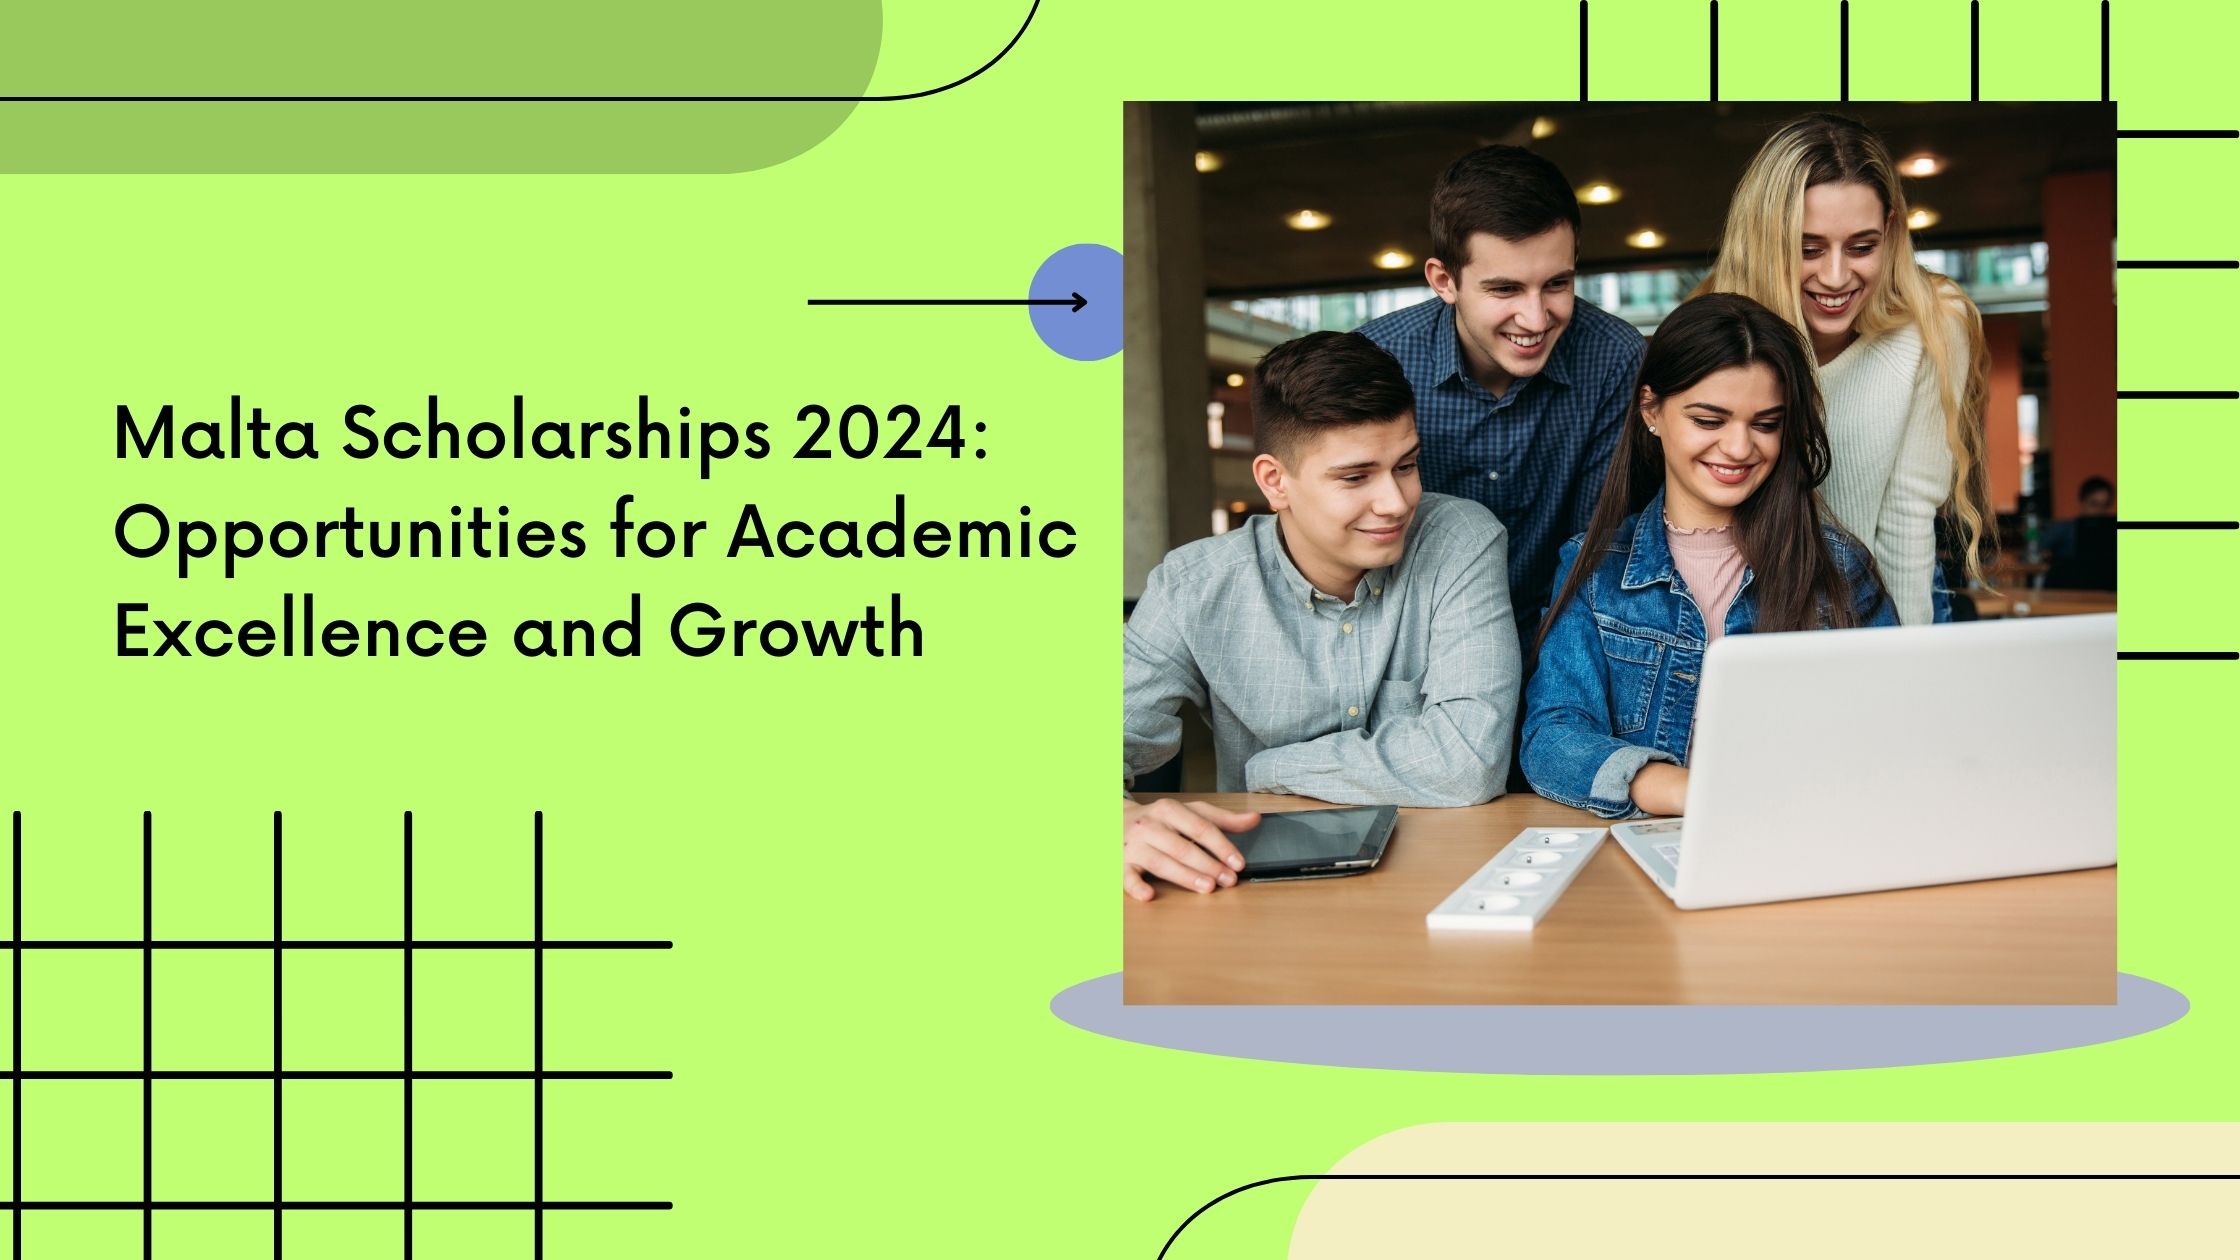 Malta Scholarships 2024 Opportunities for Academic Excellence and Growth